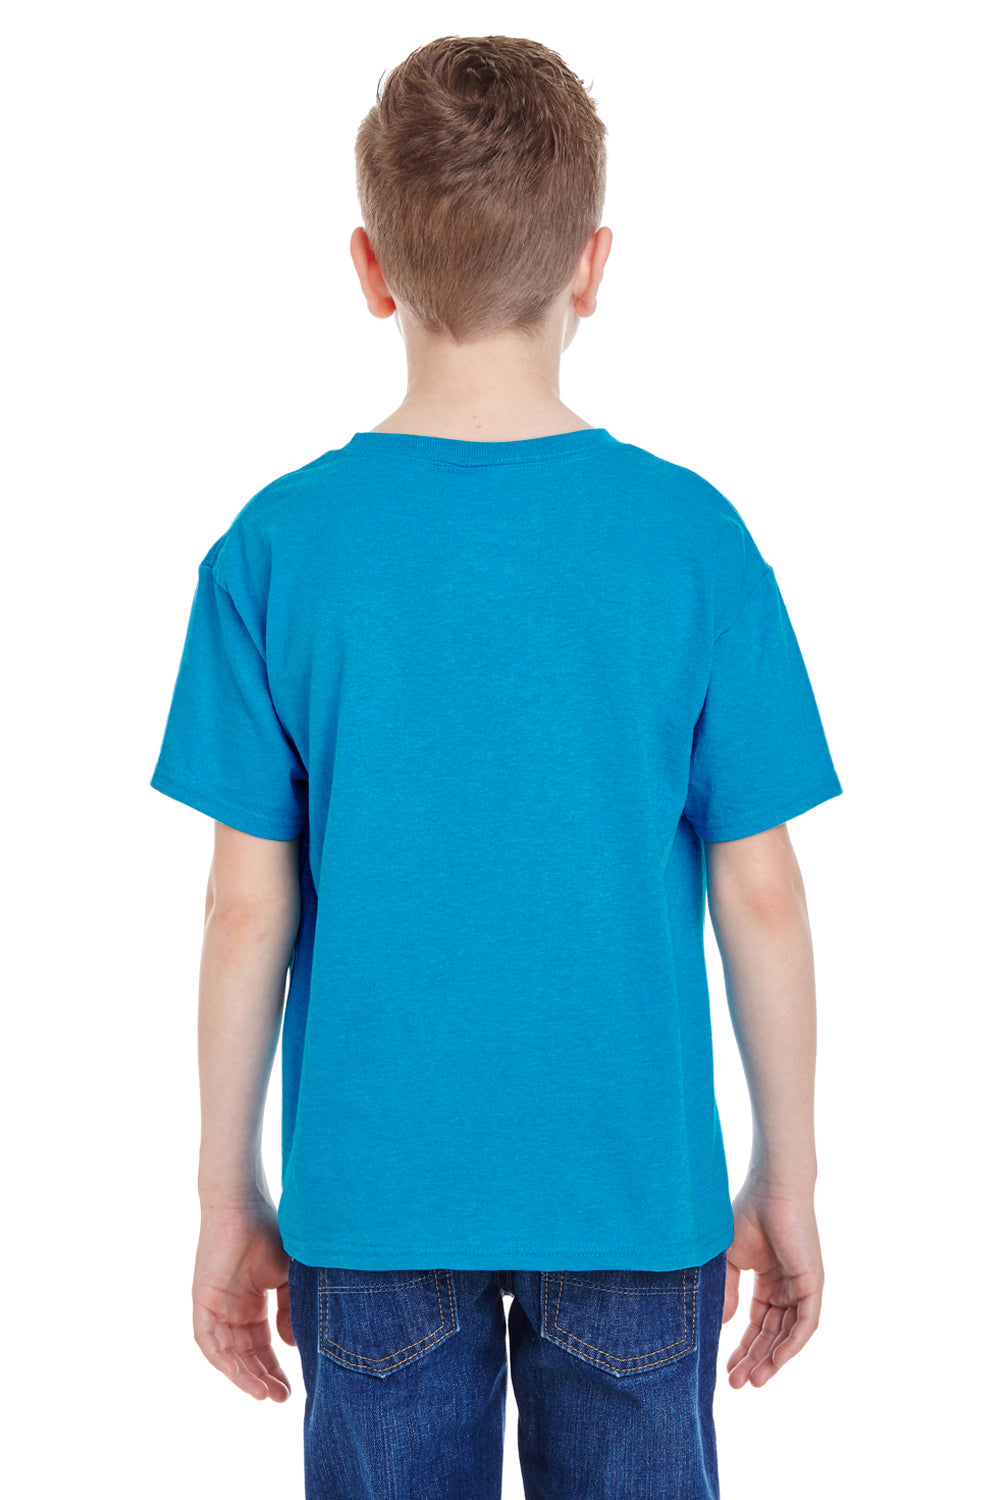 Fruit Of The Loom 3931B Youth HD Jersey Short Sleeve Crewneck T-Shirt Heather Turquoise Blue Back